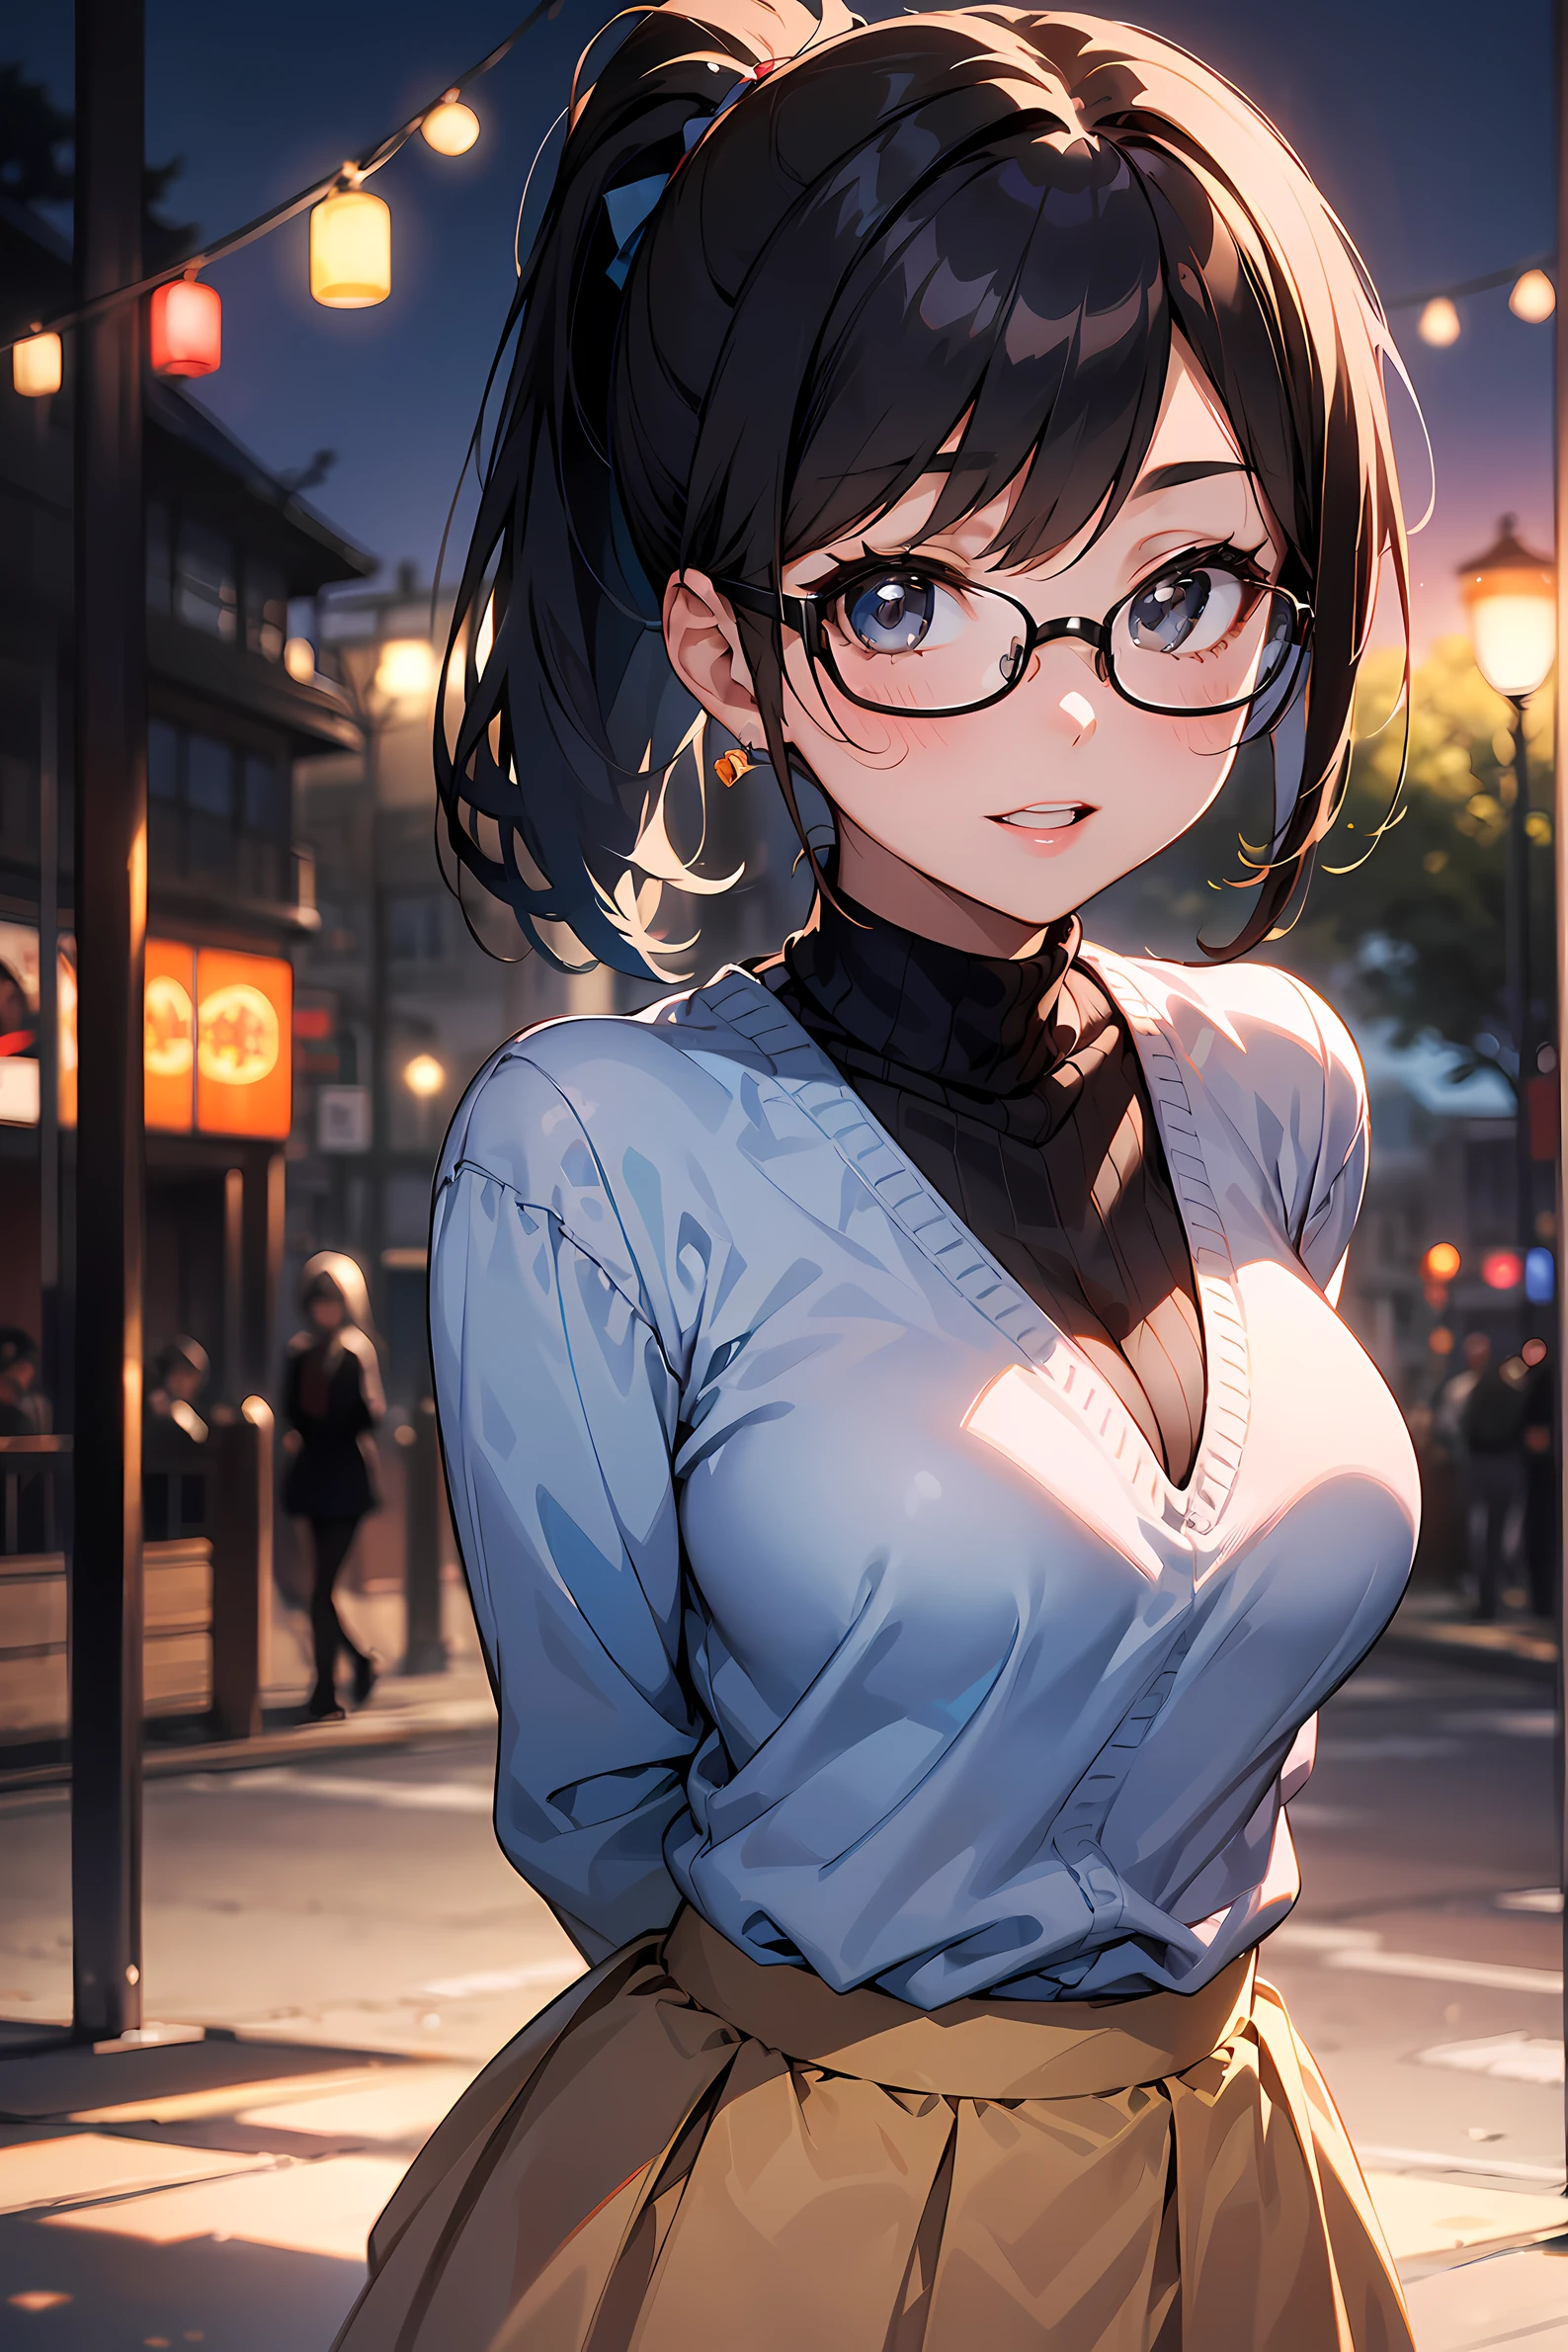 high resolution, Photo of a beautiful woman detailed_face, young handsome girl,realistic:0.5, perfect skin, (wearing a glasses:1.5), (ultra-detailed background, detailed background), bokeh, make happy expressions, happy emotion, gorgeous,pure, beautyfull detailed face and eyes,breasts, (black eyes:1.1), (Audrey Hepburn:1.3), (a extremely pretty and beautiful Japanese woman), (sexy girl), (professional attire:1.3), (22 years old: 1.1), BREAK, (blue high-neck sweater:1.2, long sleeve:1.2), (beige Pleated skirt:1.2), (leather boots))), cleavage, beautiful detailed skin, (cute:1.2), (blonde hair), ((jpop idol)), (upper thigh:0.6), (depth of field),soft light, Lens Glow looking at viewer, (Drooping eyes:1.2), straight teeth,smile, floating hair, (blond hair:1.2), brown eyes BREAK movie scene, cinematic, full colors, 4k, 8k, 16k, RAW photo, masterpiece, professionally color graded, professional photography, high school girl, hair up, , soft clean focus, realistic lighting and shading, (an extremely delicate and beautiful art)1.3, elegant,active angle,dynamism pose BREAK (ponytail:1.3), (shiny-black thin hair:1.2), bangs, dark brown eyes, beautiful eyes, princess eyes, (big eyes:1.3), bangs, wearing a glasses:1.3, Hair between eyes, short hair:1.3, (slender:1.1), (medium-breasts:0.95), (thin waist: 1.15), (detailed beautiful girl: 1.4), Parted lips, Red lips, full-make-up face, (shiny skin), ((Perfect Female Body)), (upper body image:1.3), Perfect Anatomy, Perfect Proportions, (most beautiful Korean actress face:1.3, extremely cute and beautiful Japanese actress face:1.3), ,(1glasses girl:1.3, solo), ,(blush:1.1), gray background, solo focus, (bust shot:1.2), cinematic light, (nostalgic night scene:1.4), (aquariums:1.4), the vibrant glow of neon lights, retro-styled carnival rides, (arms behind back :1.4), (looking at viewer:1.2